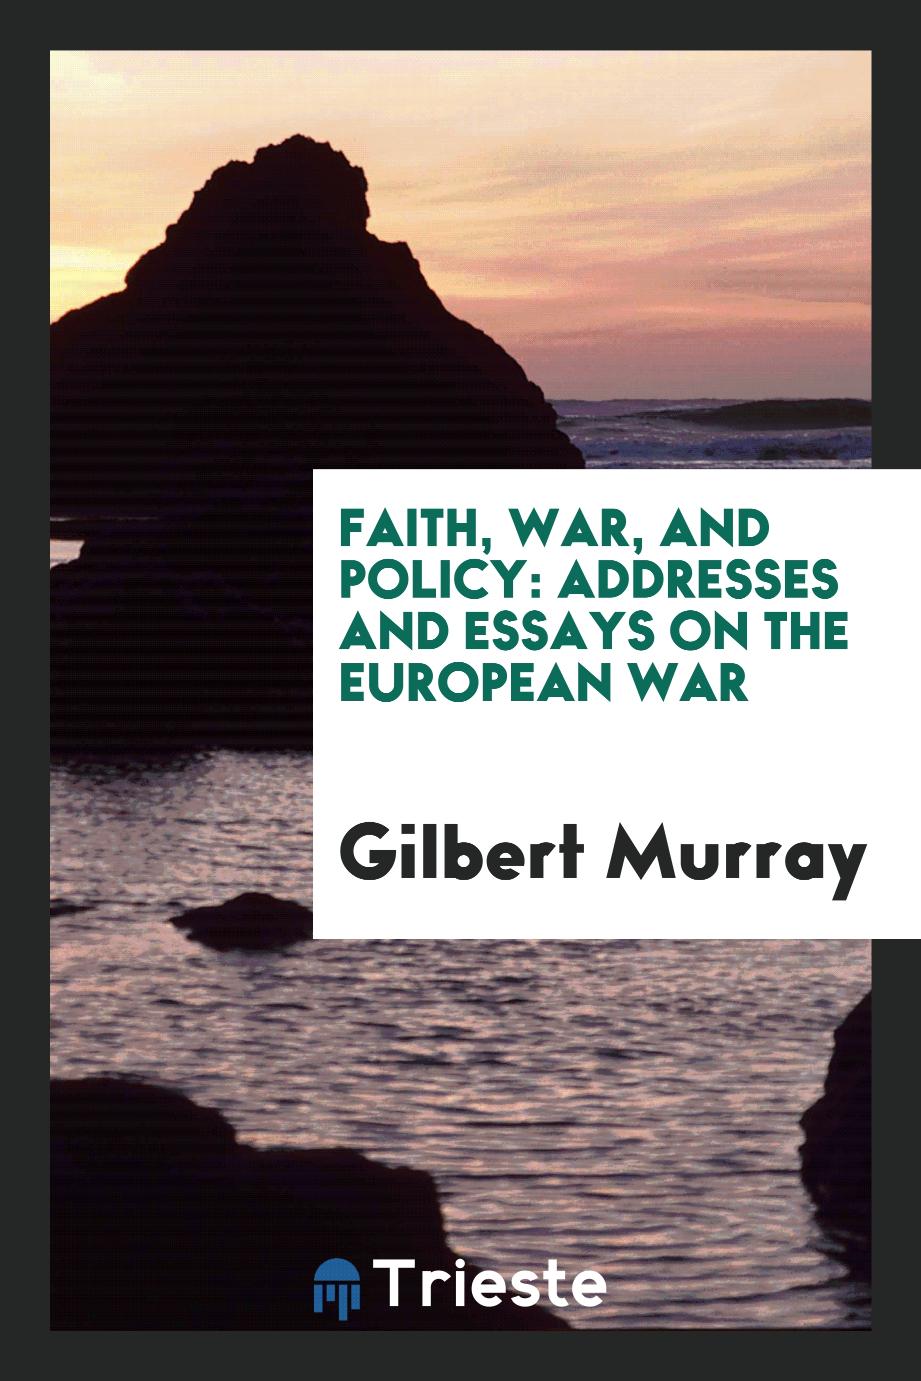 Faith, War, and Policy: Addresses and Essays on the European War